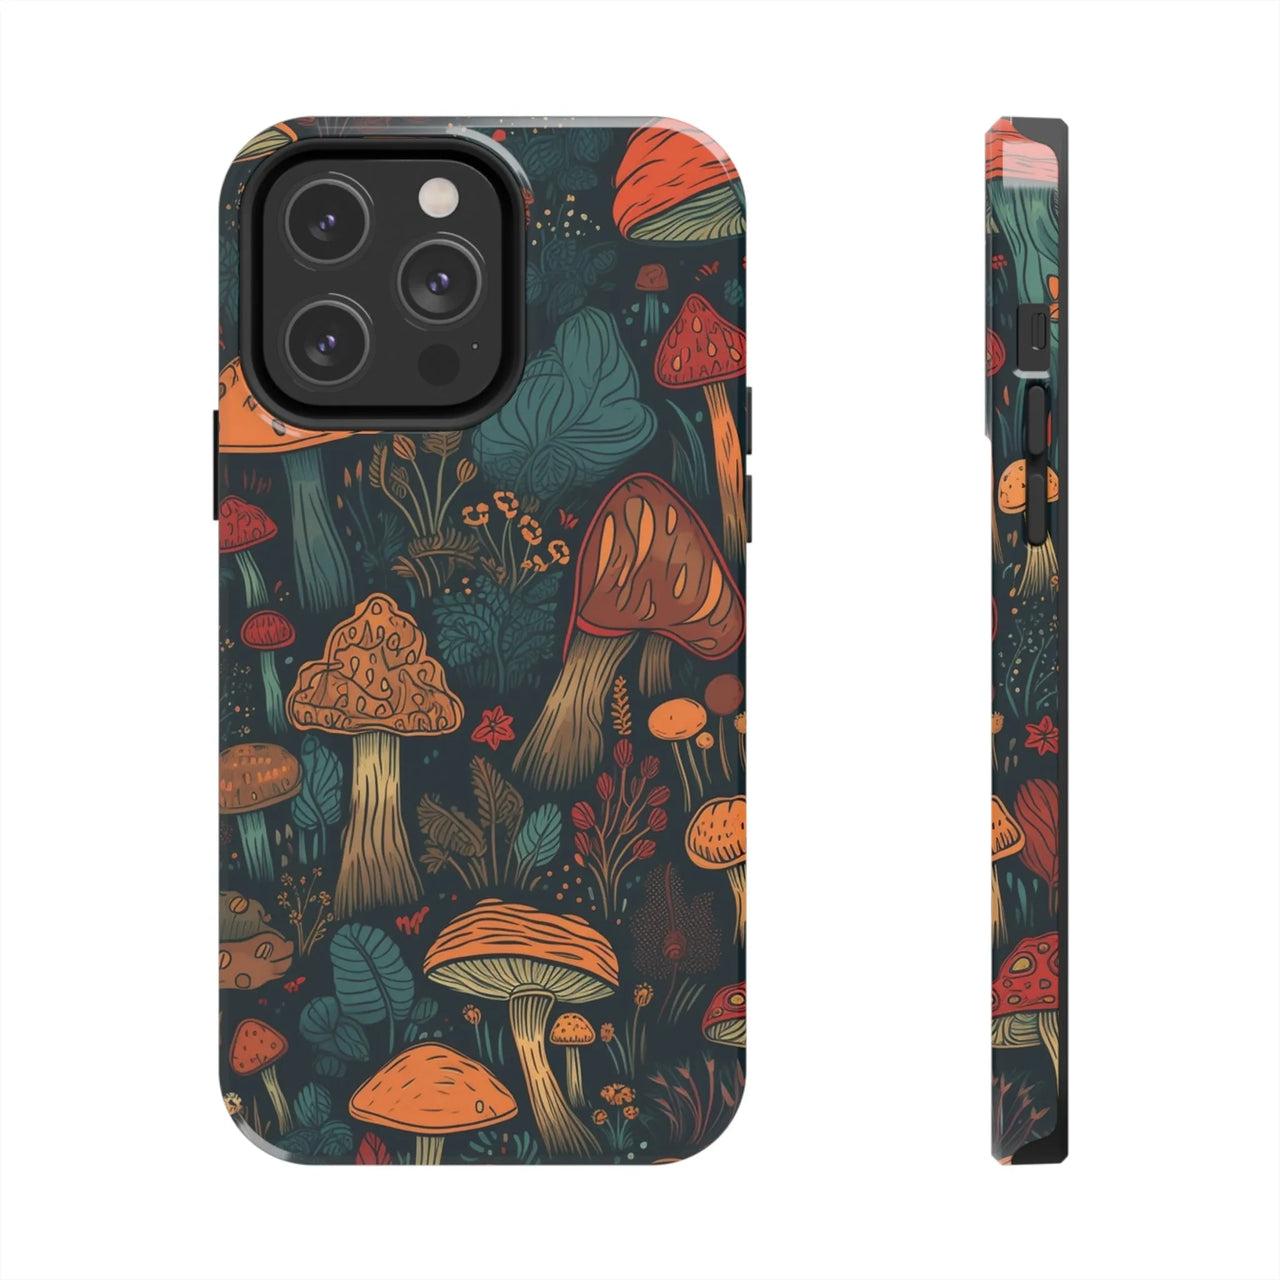 Phone Case: Retro Vintage 70s Aesthetic, Indie Grunge Hippie Groovy Abstract Floral Psychedelic 70's - GroovyGallery